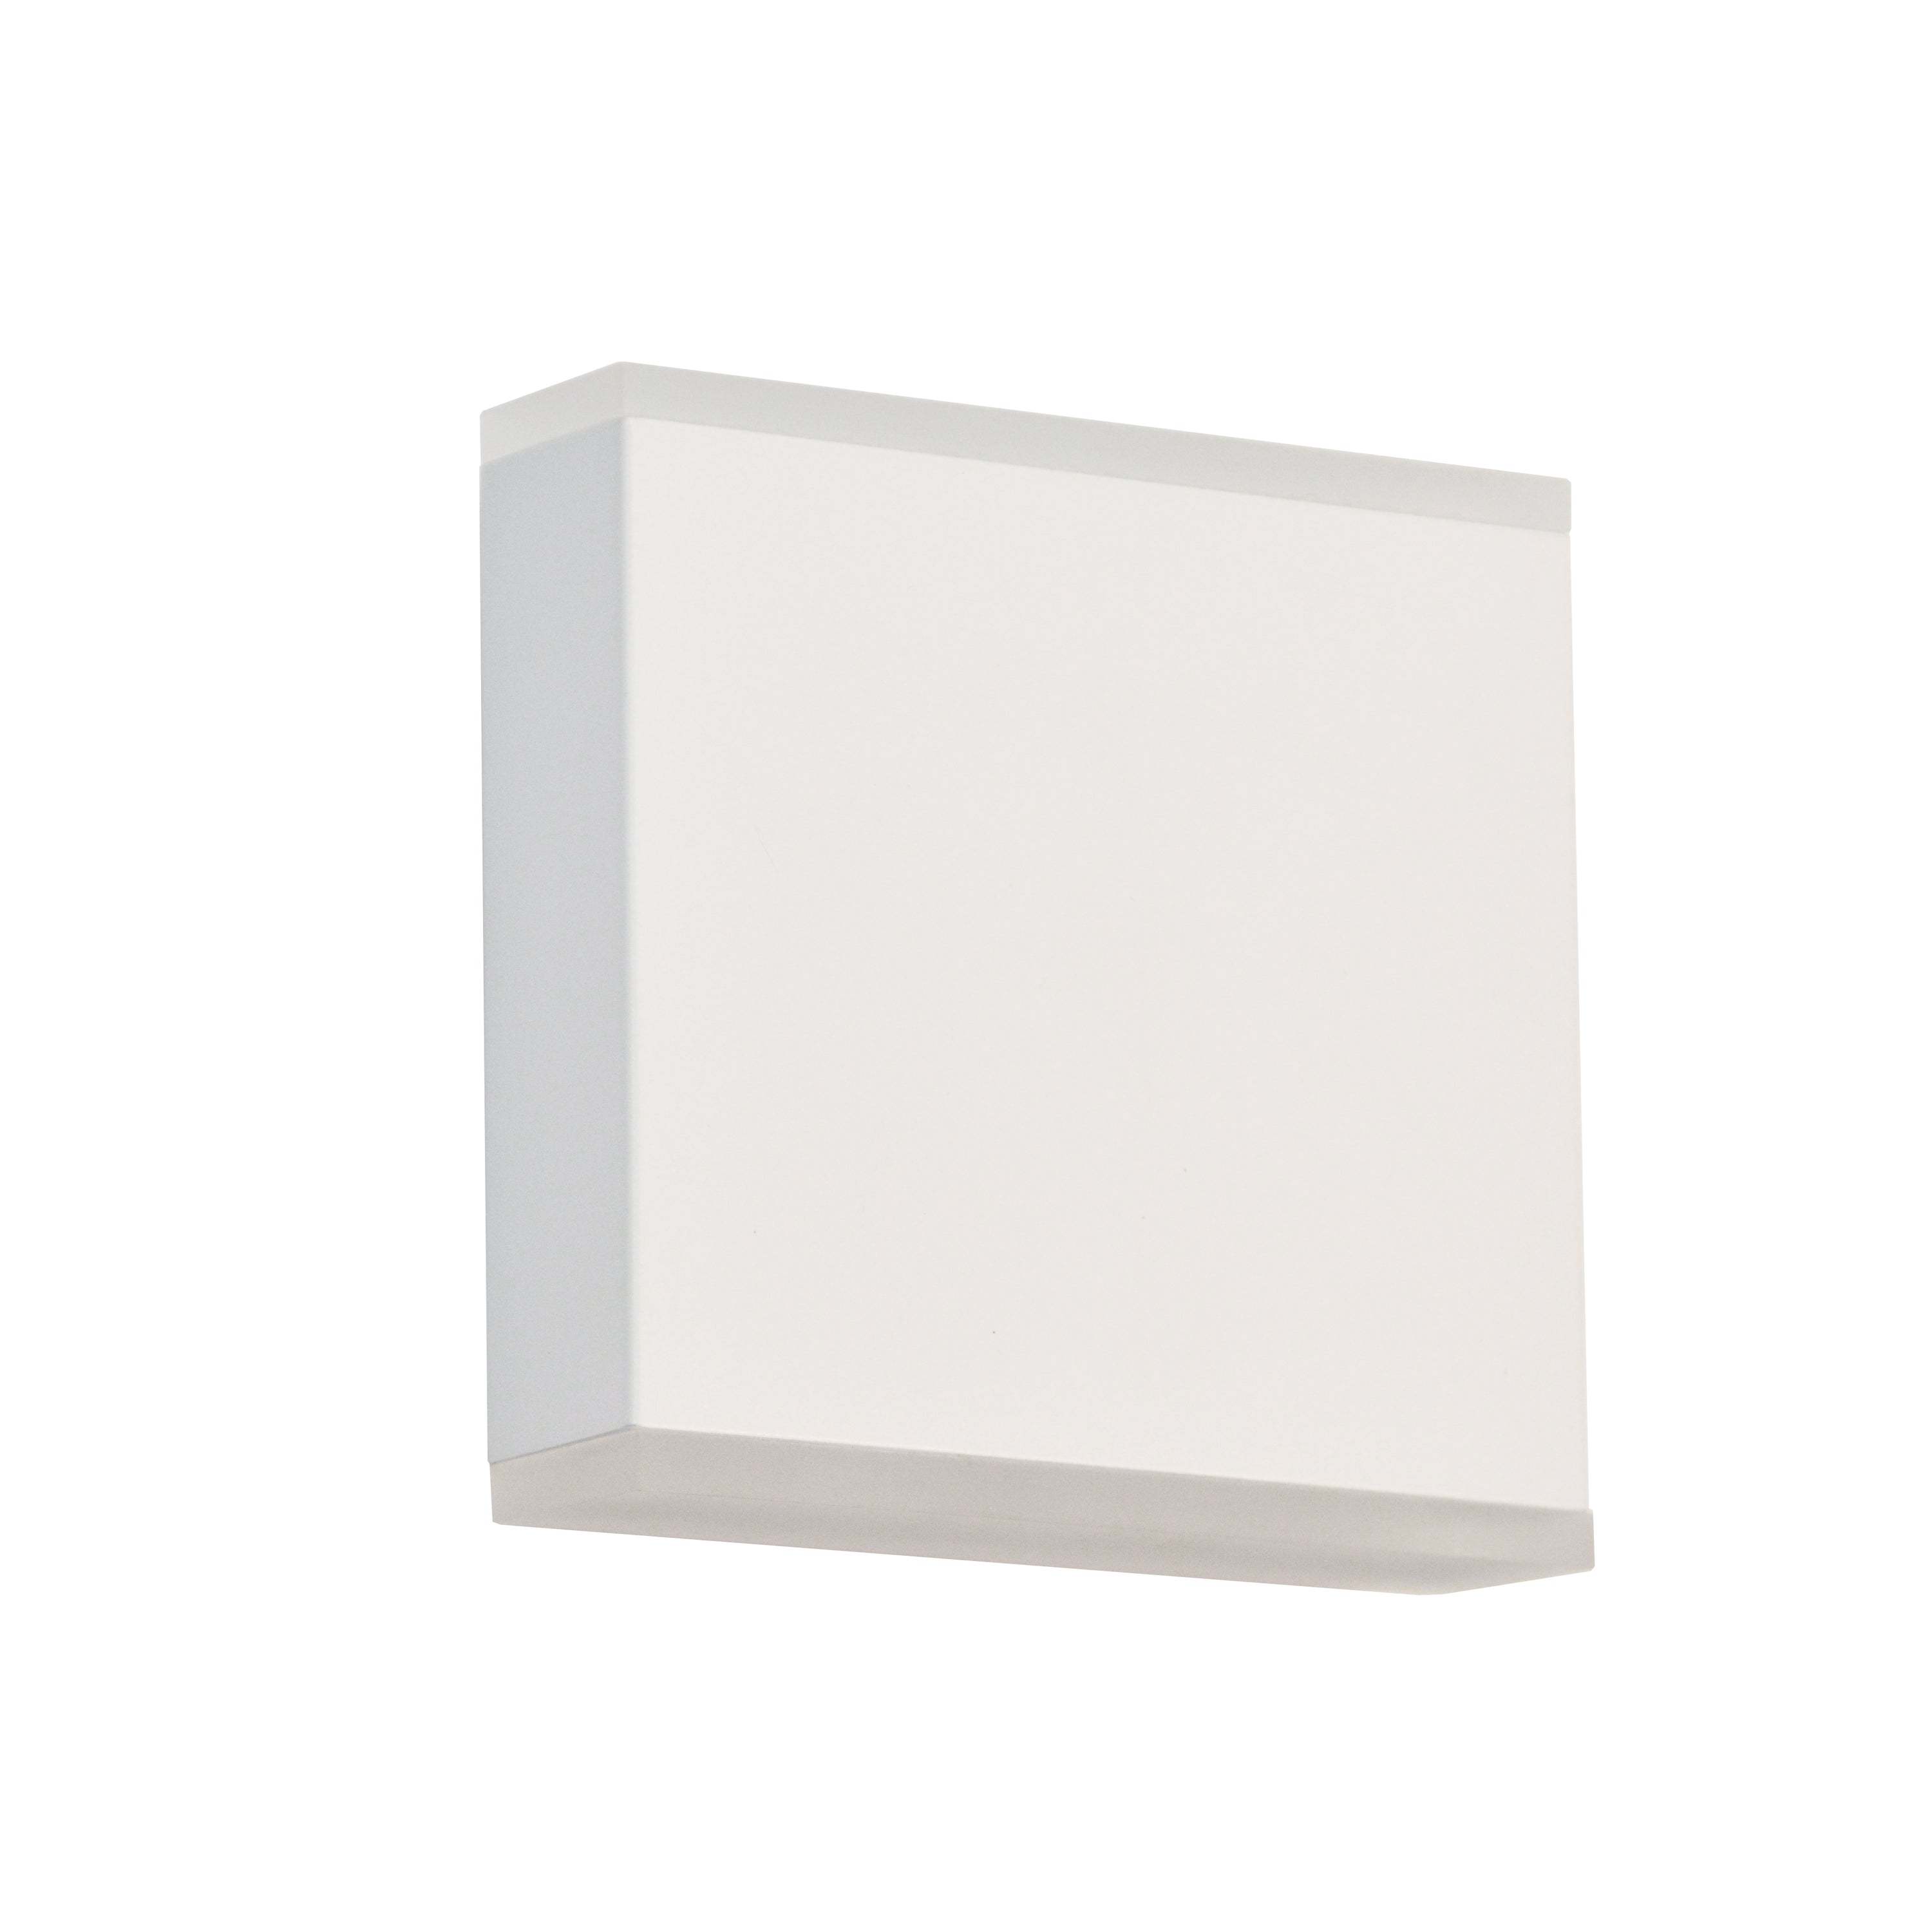 Dainolite Emery - EMY-550-5W-MW - 15W LED Wall Sconce, Matte White with Frosted Acrylic Diffuser - White